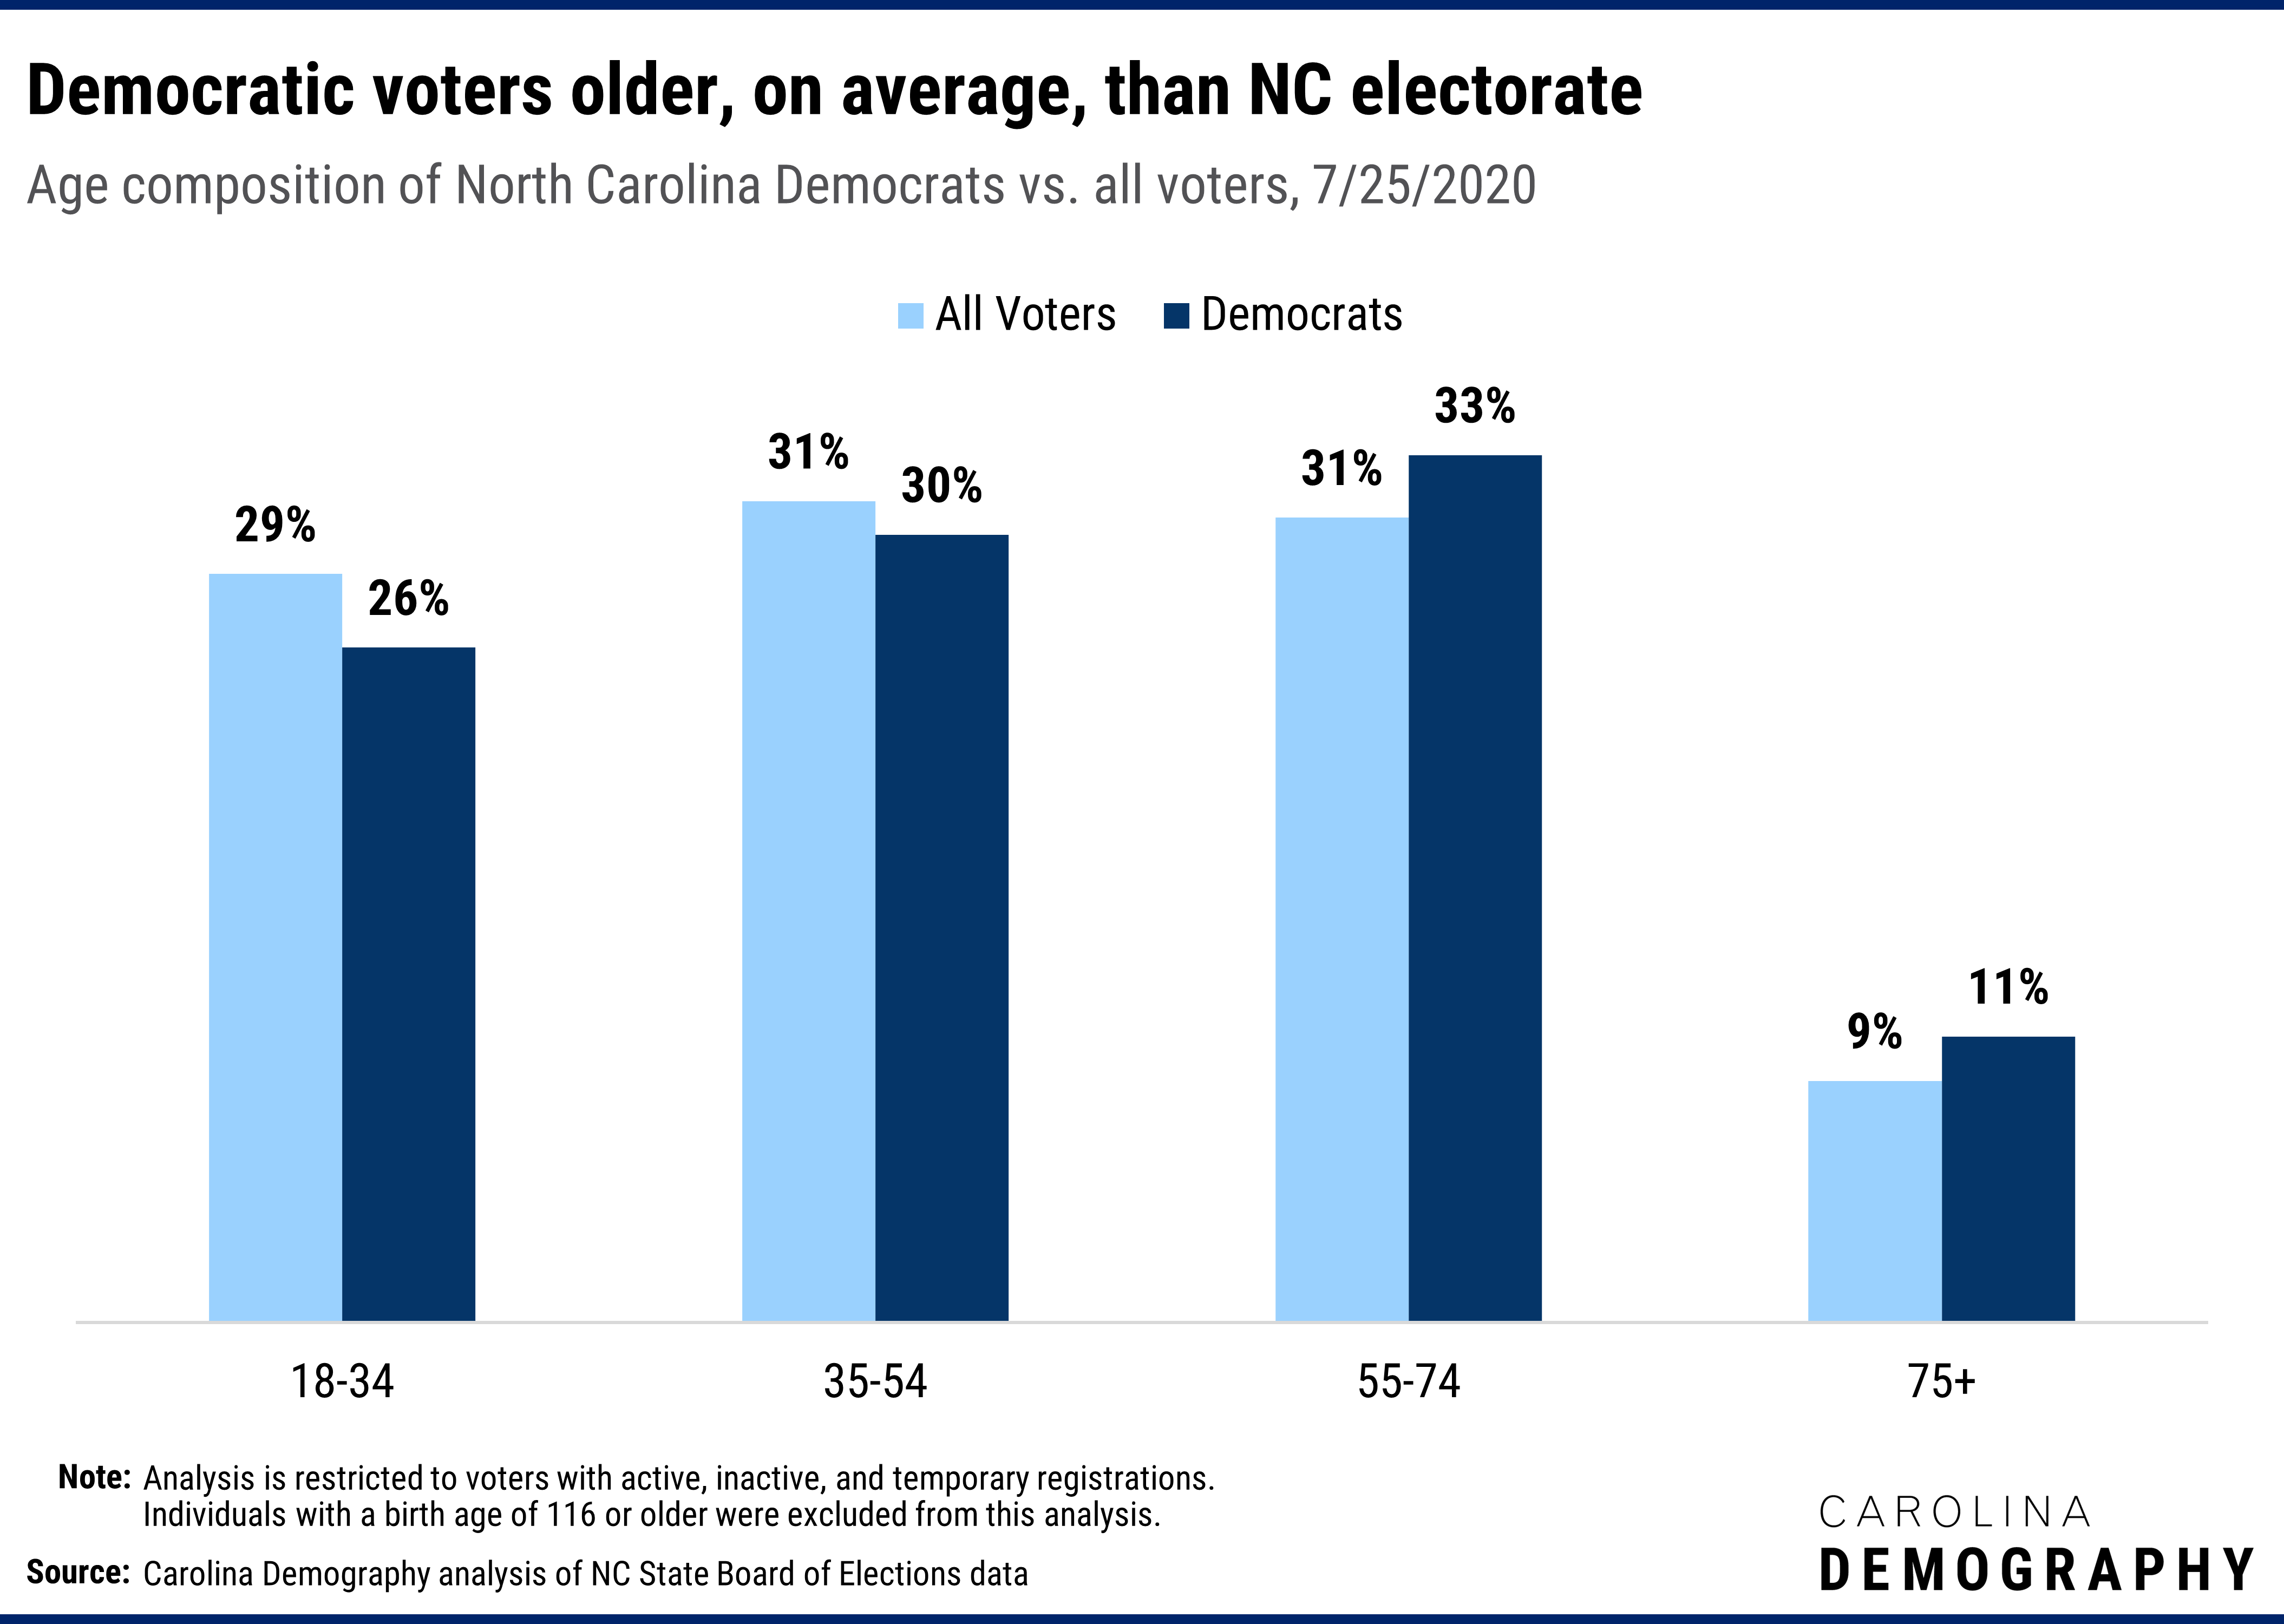 Democratic voters older, on average, than NC electorate Age composition of North Carolina Democrats vs. all voters, 7/25/2020. Older voters are the most likely to register as a Democrat, partly reflecting the legacy of the “Solid South.” Just over 43% of voters ages 75 and older are registered Democrats compared to 33% of 18-34 year-olds, 35% of 35-54 year-olds, and 39% of voters ages 55-74. As a result, older adults comprise a larger share of the state’s Democratic voters than the overall electorate.